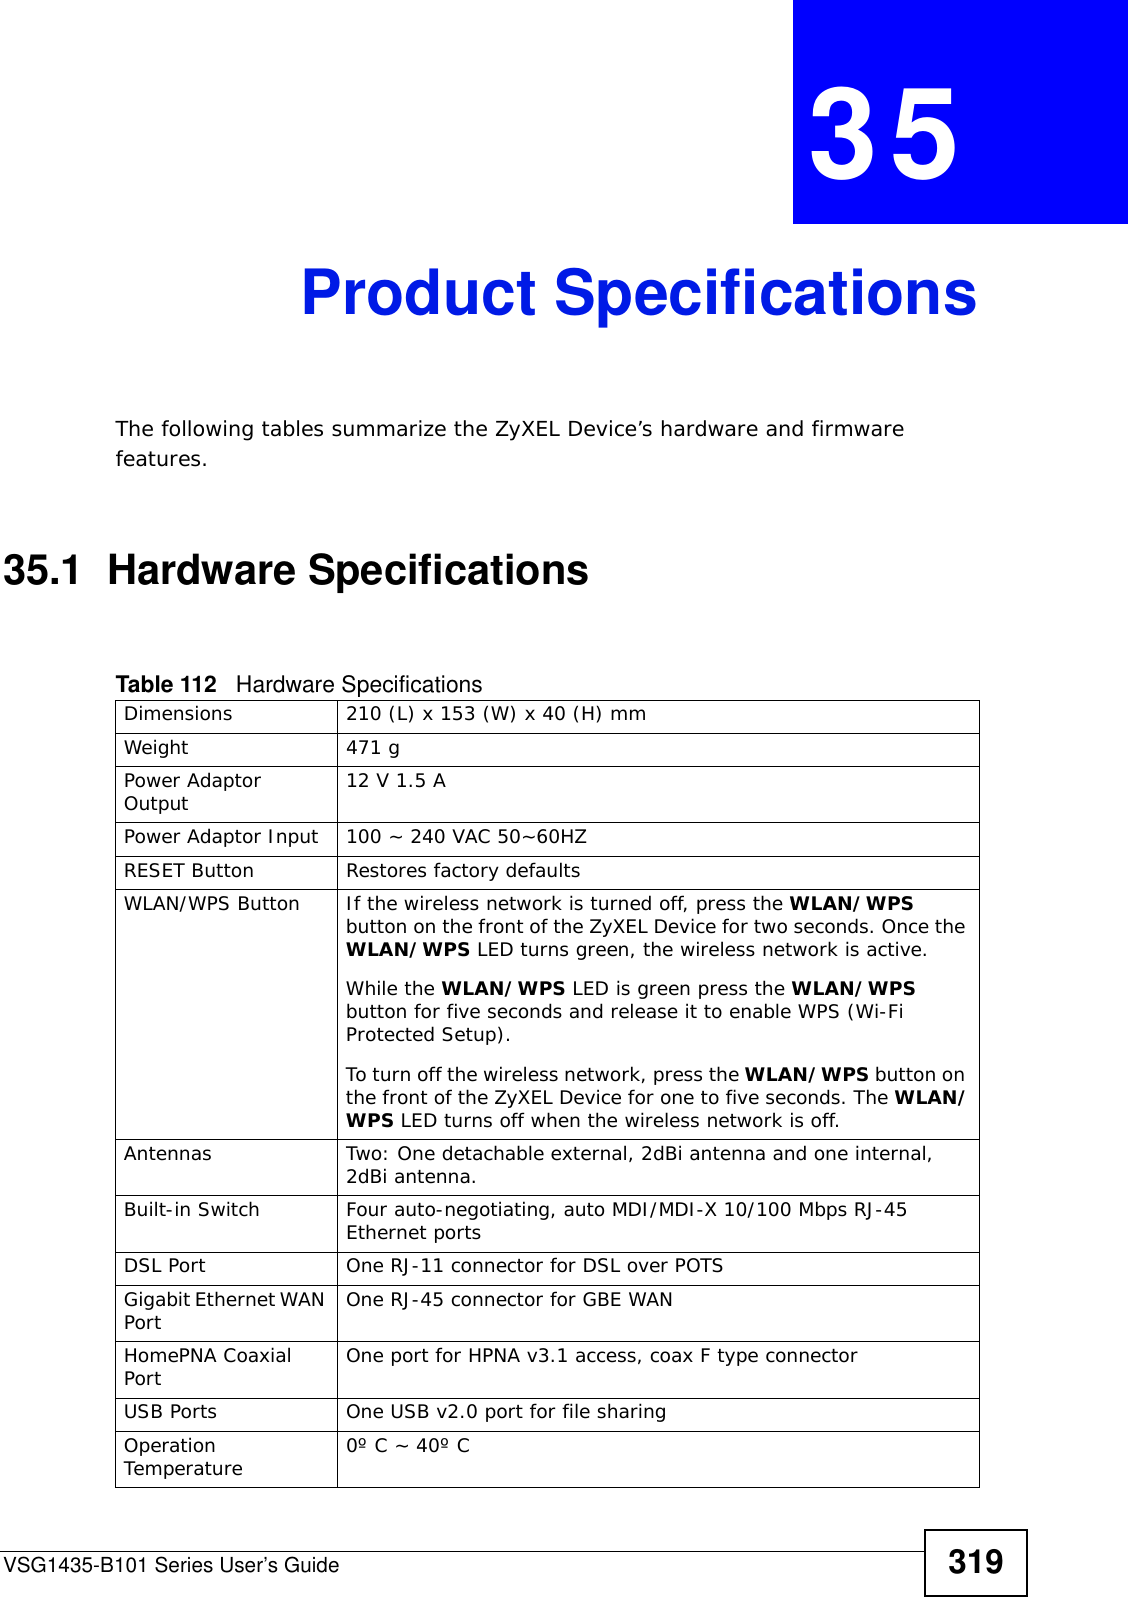 VSG1435-B101 Series User’s Guide 319CHAPTER  35 Product SpecificationsThe following tables summarize the ZyXEL Device’s hardware and firmware features.35.1  Hardware SpecificationsTable 112   Hardware SpecificationsDimensions 210 (L) x 153 (W) x 40 (H) mmWeight 471 gPower Adaptor Output 12 V 1.5 APower Adaptor Input 100 ~ 240 VAC 50~60HZRESET Button Restores factory defaultsWLAN/WPS Button  If the wireless network is turned off, press the WLAN/WPS button on the front of the ZyXEL Device for two seconds. Once the WLAN/WPS LED turns green, the wireless network is active.While the WLAN/WPS LED is green press the WLAN/WPS button for five seconds and release it to enable WPS (Wi-Fi Protected Setup).To turn off the wireless network, press the WLAN/WPS button on the front of the ZyXEL Device for one to five seconds. The WLAN/WPS LED turns off when the wireless network is off.Antennas Two: One detachable external, 2dBi antenna and one internal, 2dBi antenna.Built-in Switch Four auto-negotiating, auto MDI/MDI-X 10/100 Mbps RJ-45 Ethernet portsDSL Port One RJ-11 connector for DSL over POTSGigabit Ethernet WAN Port One RJ-45 connector for GBE WANHomePNA Coaxial Port One port for HPNA v3.1 access, coax F type connectorUSB Ports One USB v2.0 port for file sharingOperation Temperature 0º C ~ 40º C